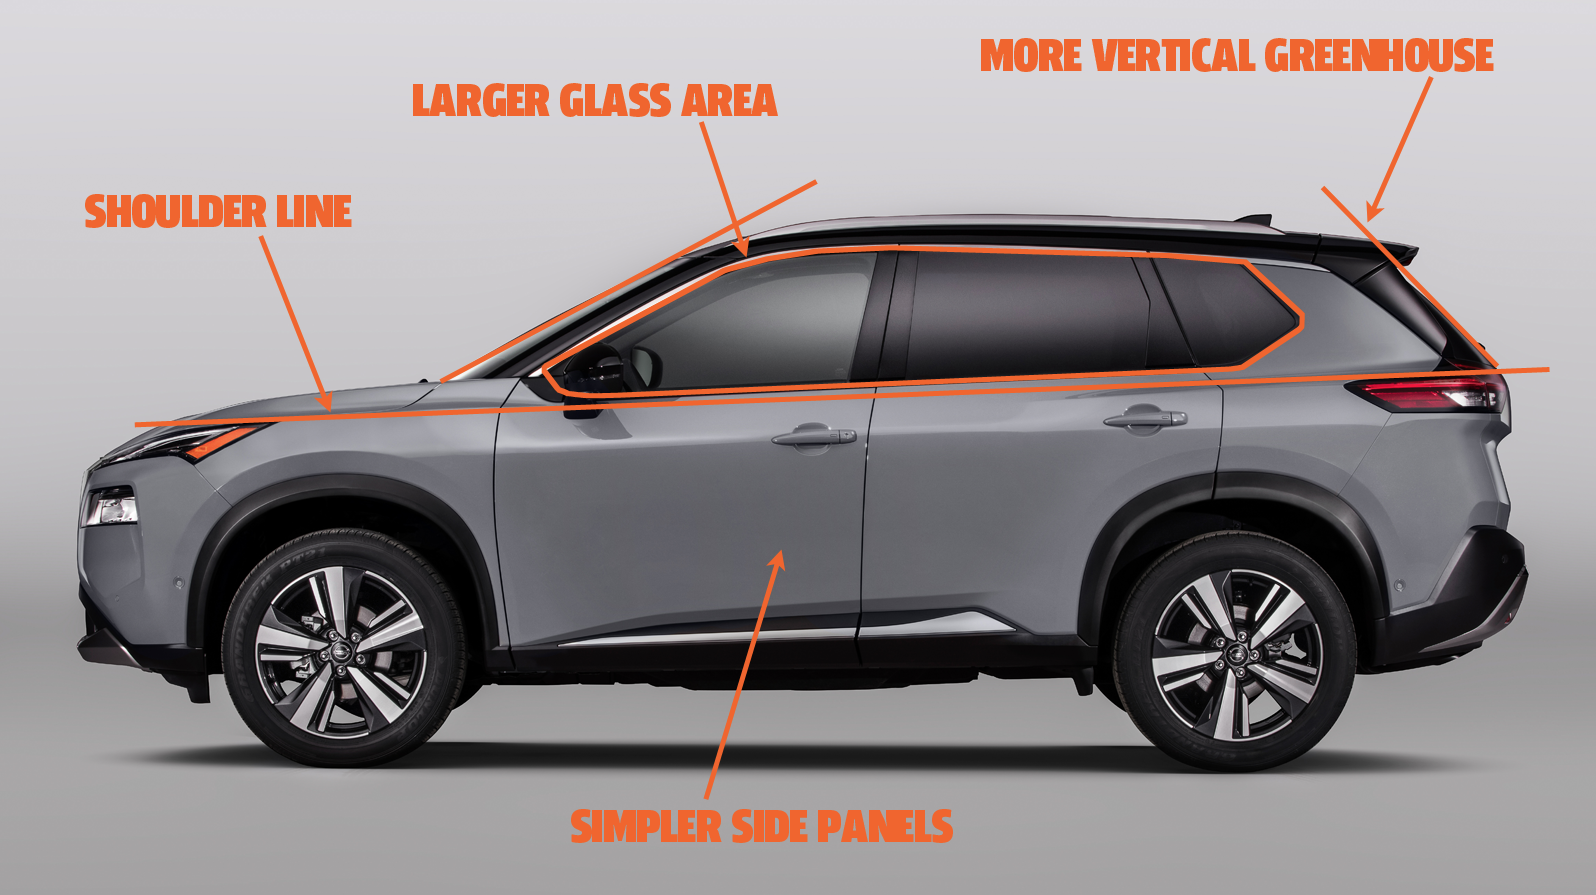 The Design Of The 2021 Nissan Rogue Is An Indicator Of What’s To Come